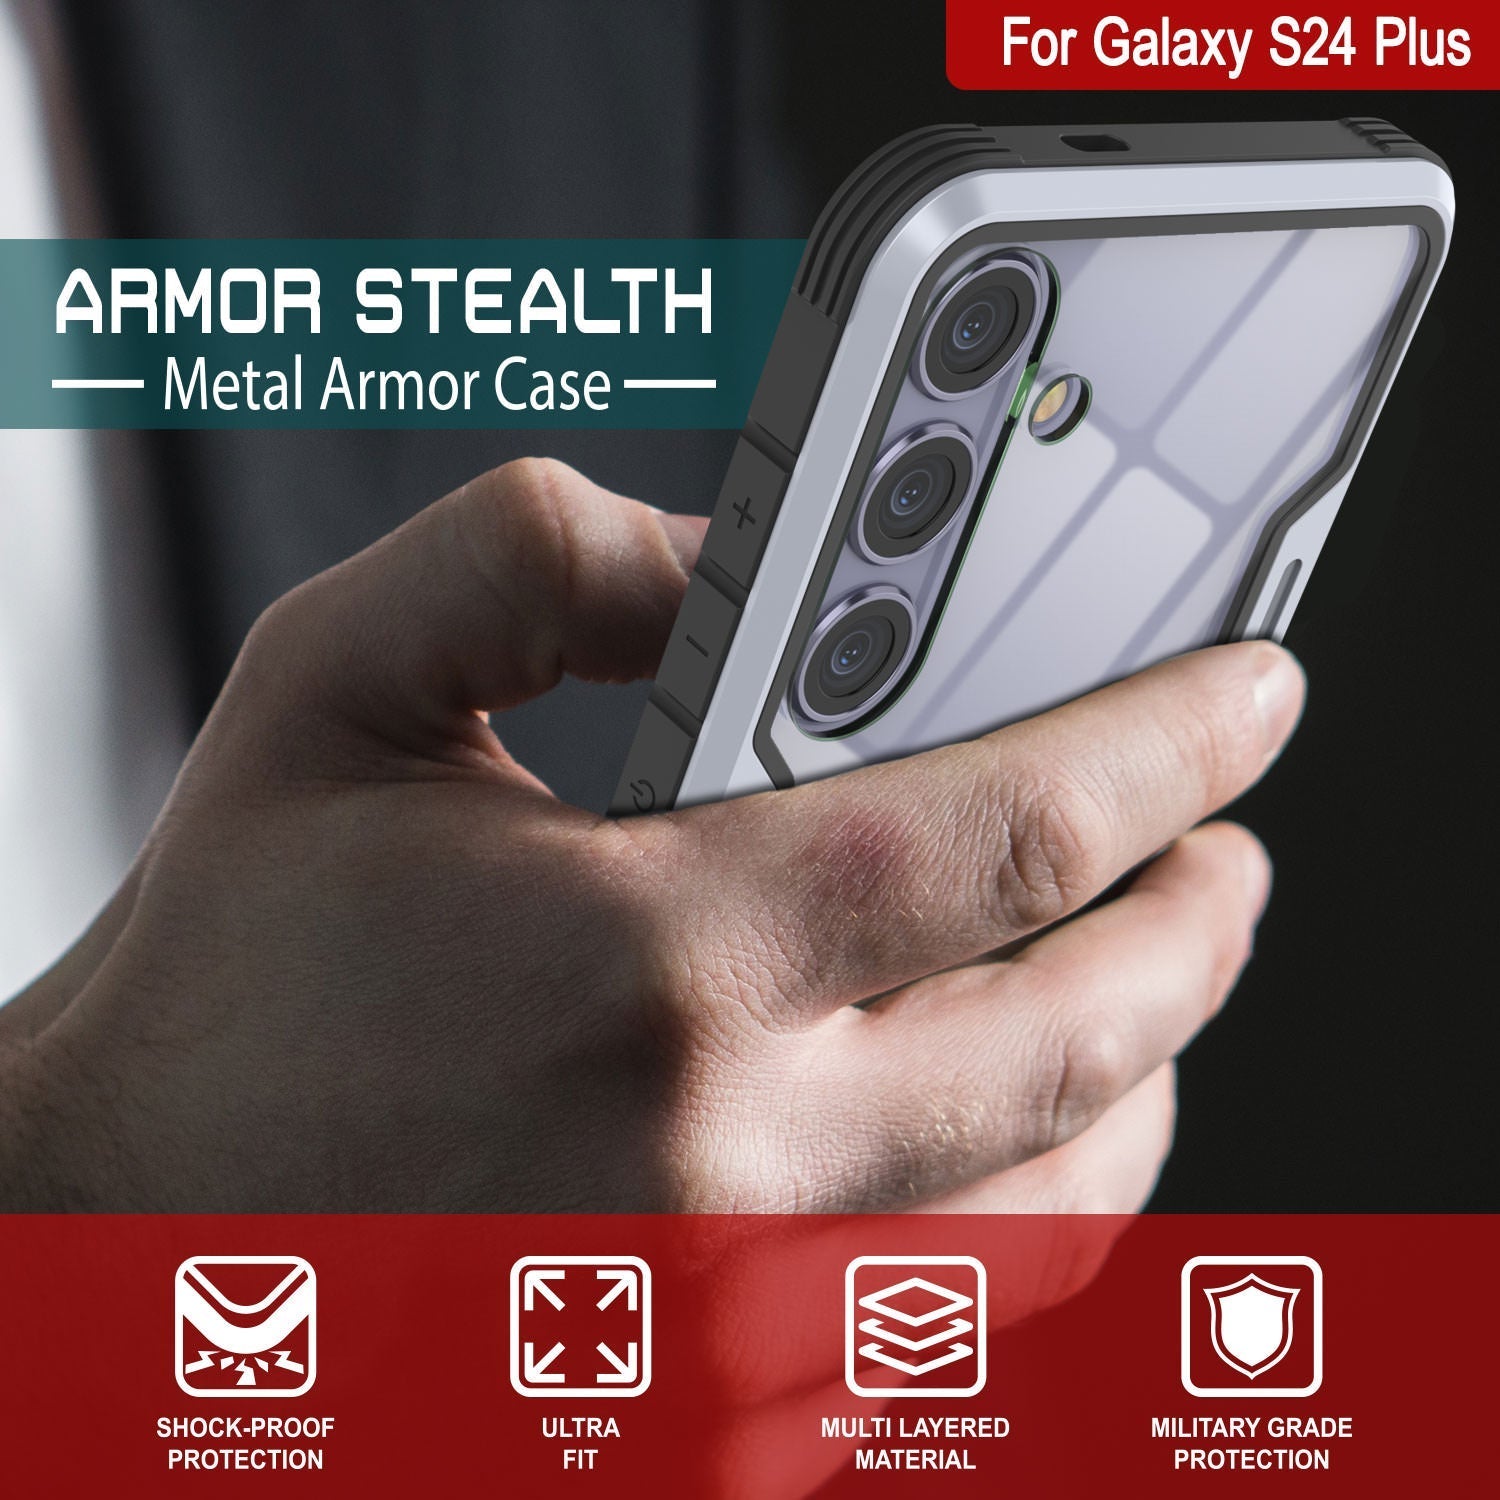 Punkcase S24+ Plus Armor Stealth Case Protective Military Grade Multilayer Cover [White]